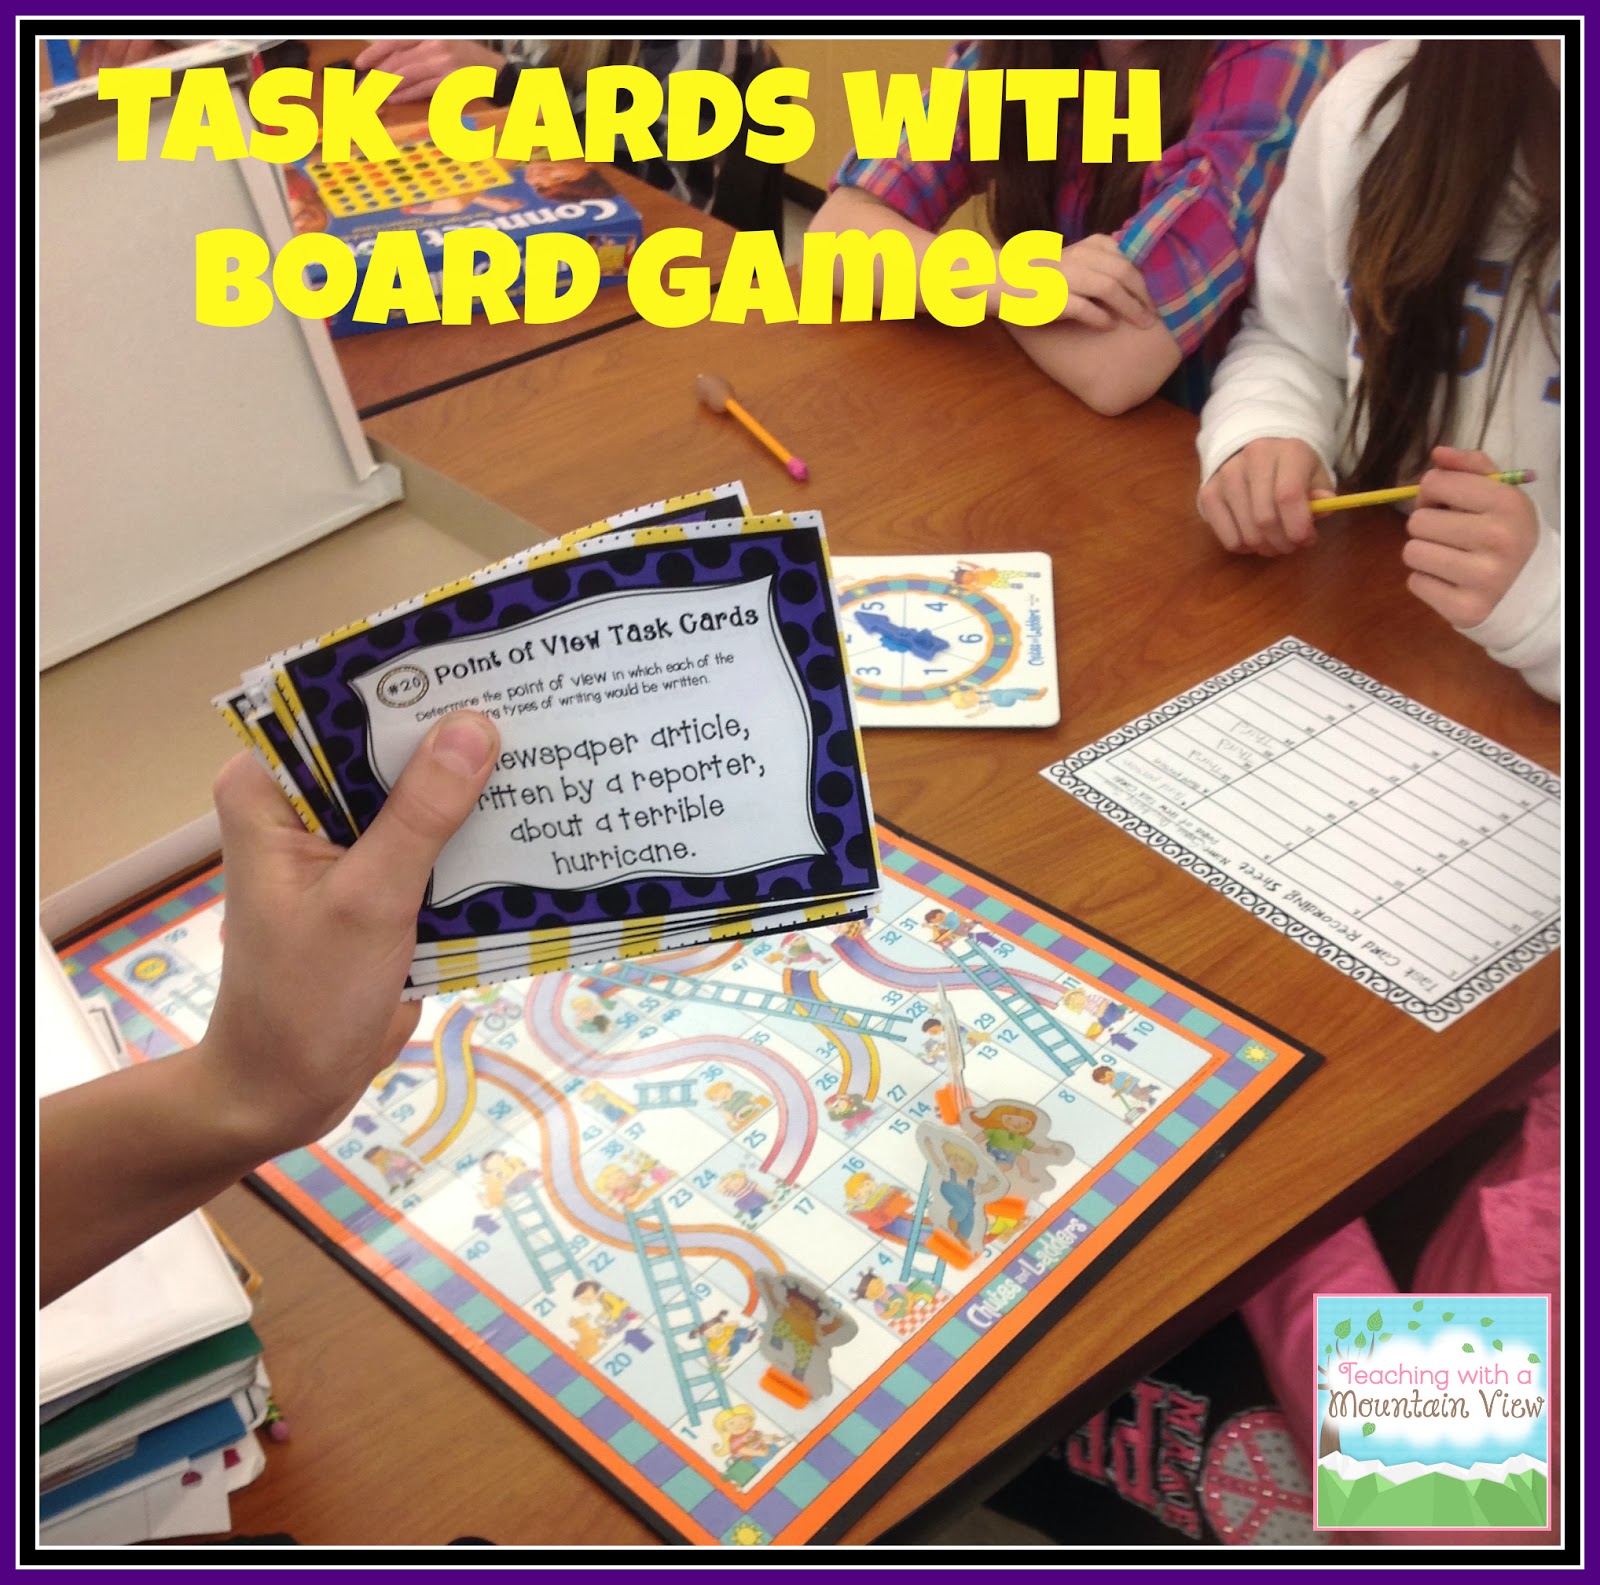 Task Card Corner: Using Board Games to Engage Students with Task Cards!